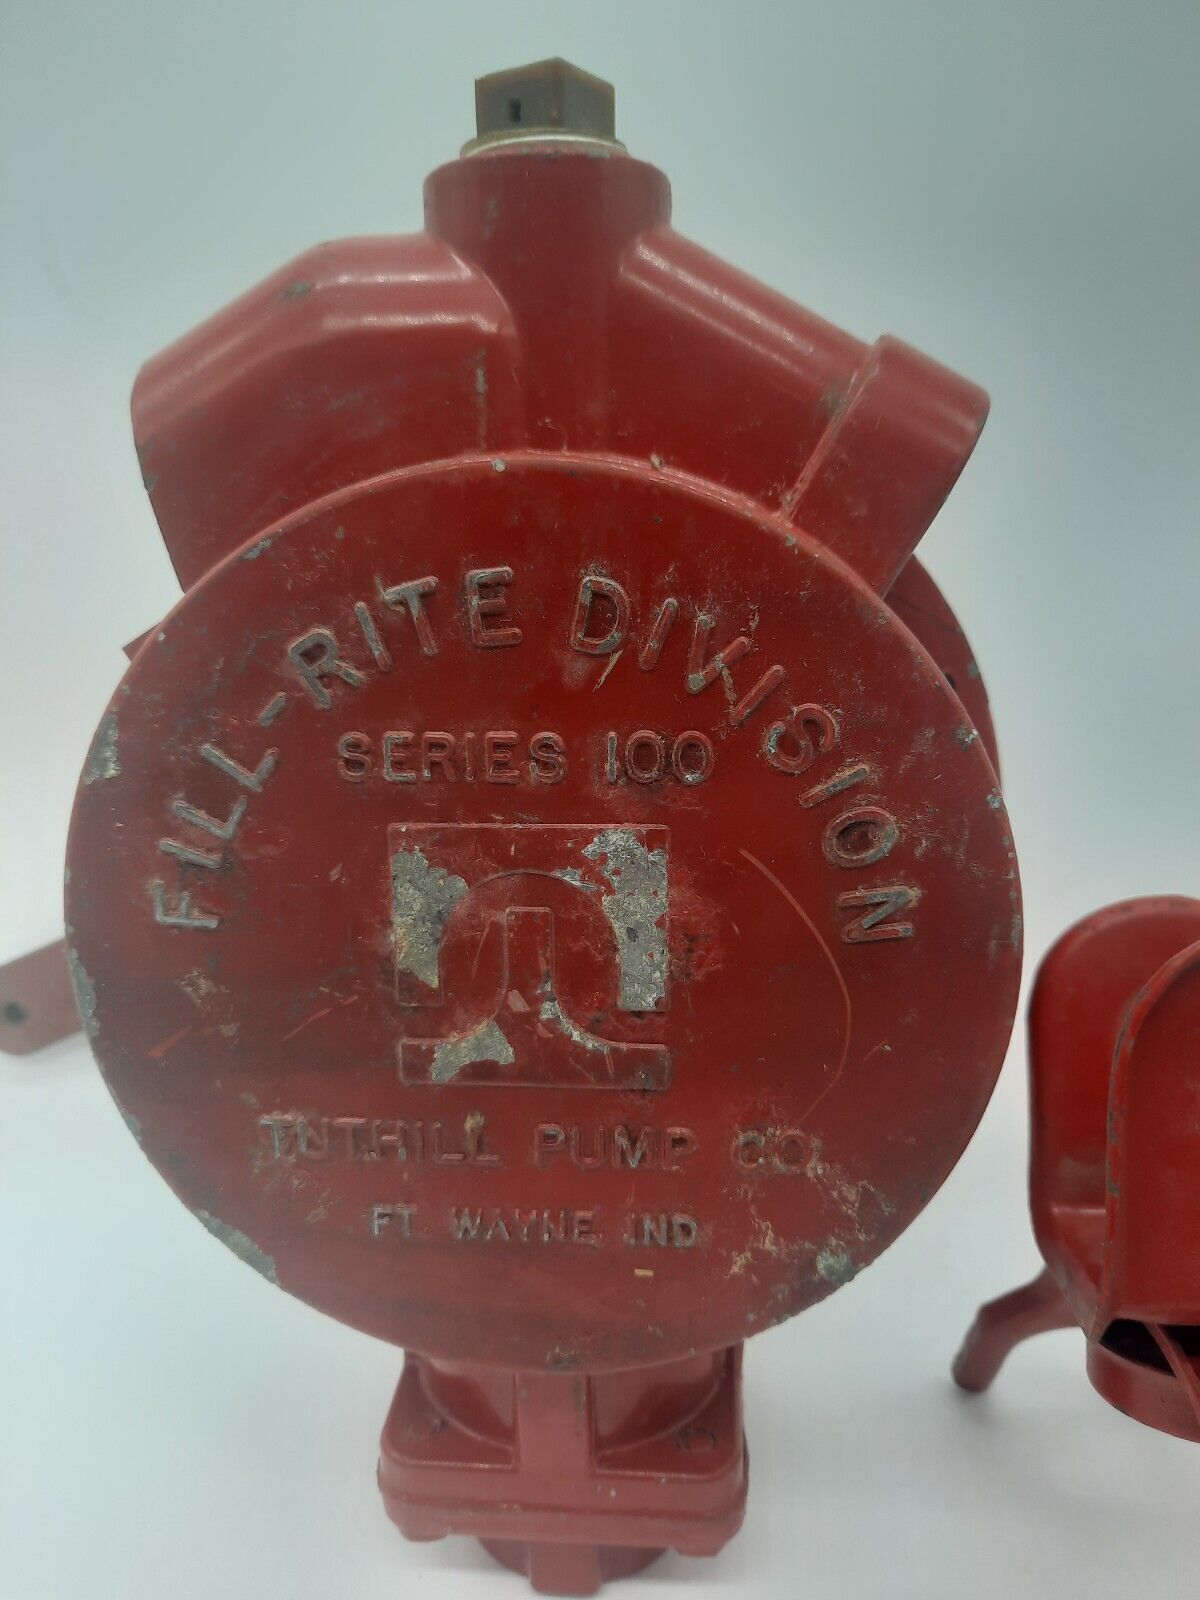 Fill-rite division series 100 Tuthill pump co Fort Wayne 